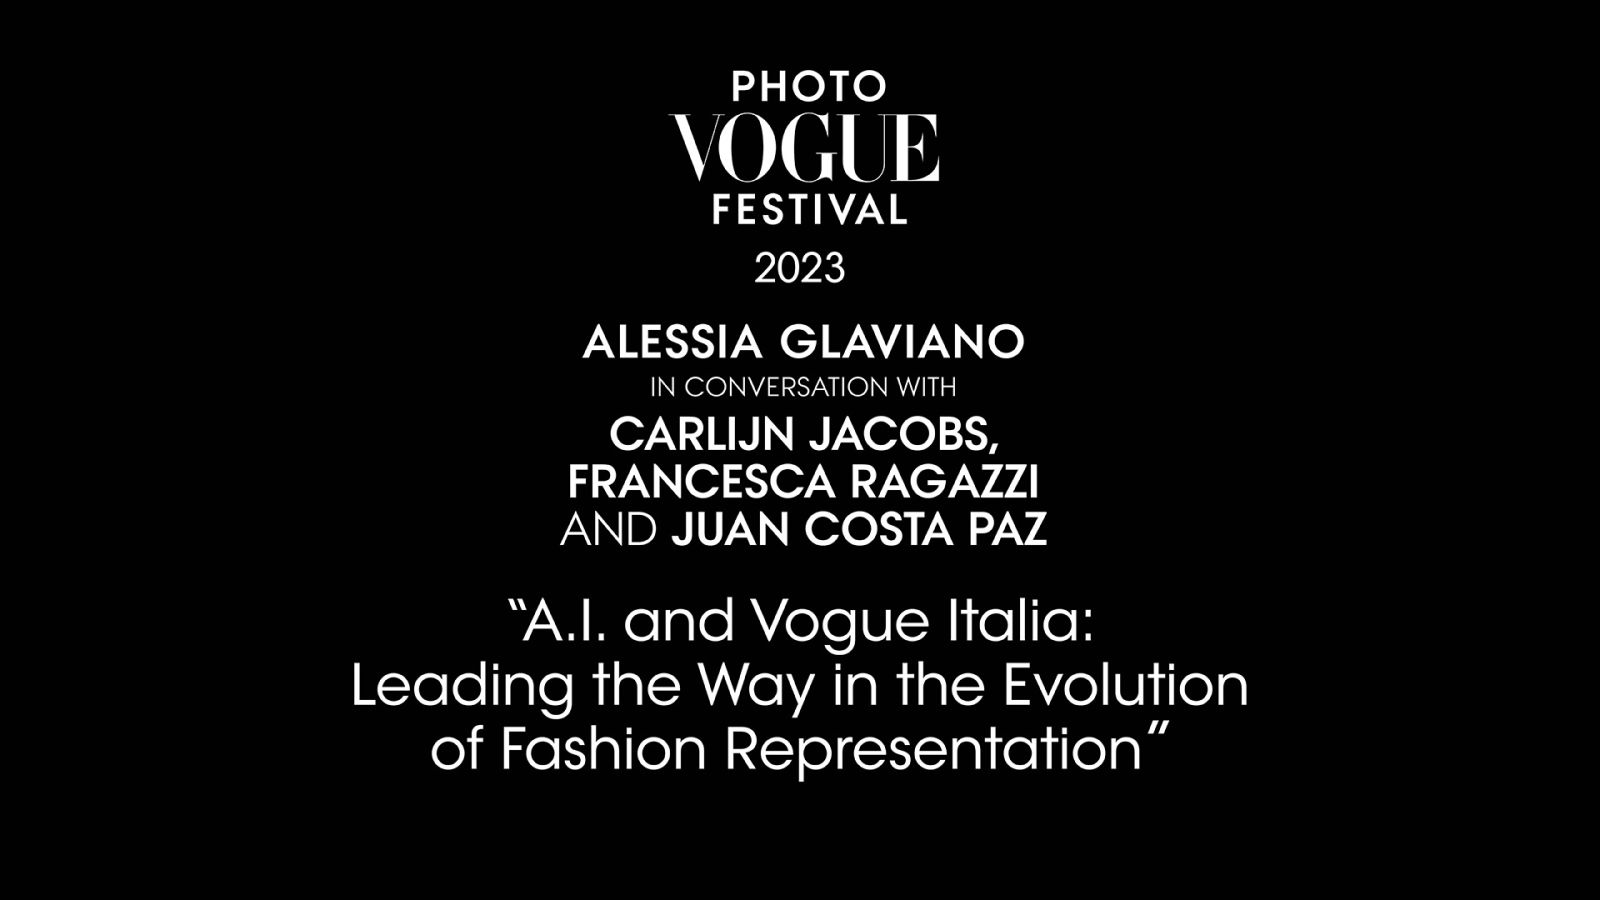 A.I. and Vogue Italia: Leading the Way in the Evolution of Fashion Representation | PhotoVogue Festival 2023: What Makes Us Human? Image in the Age of A.I.